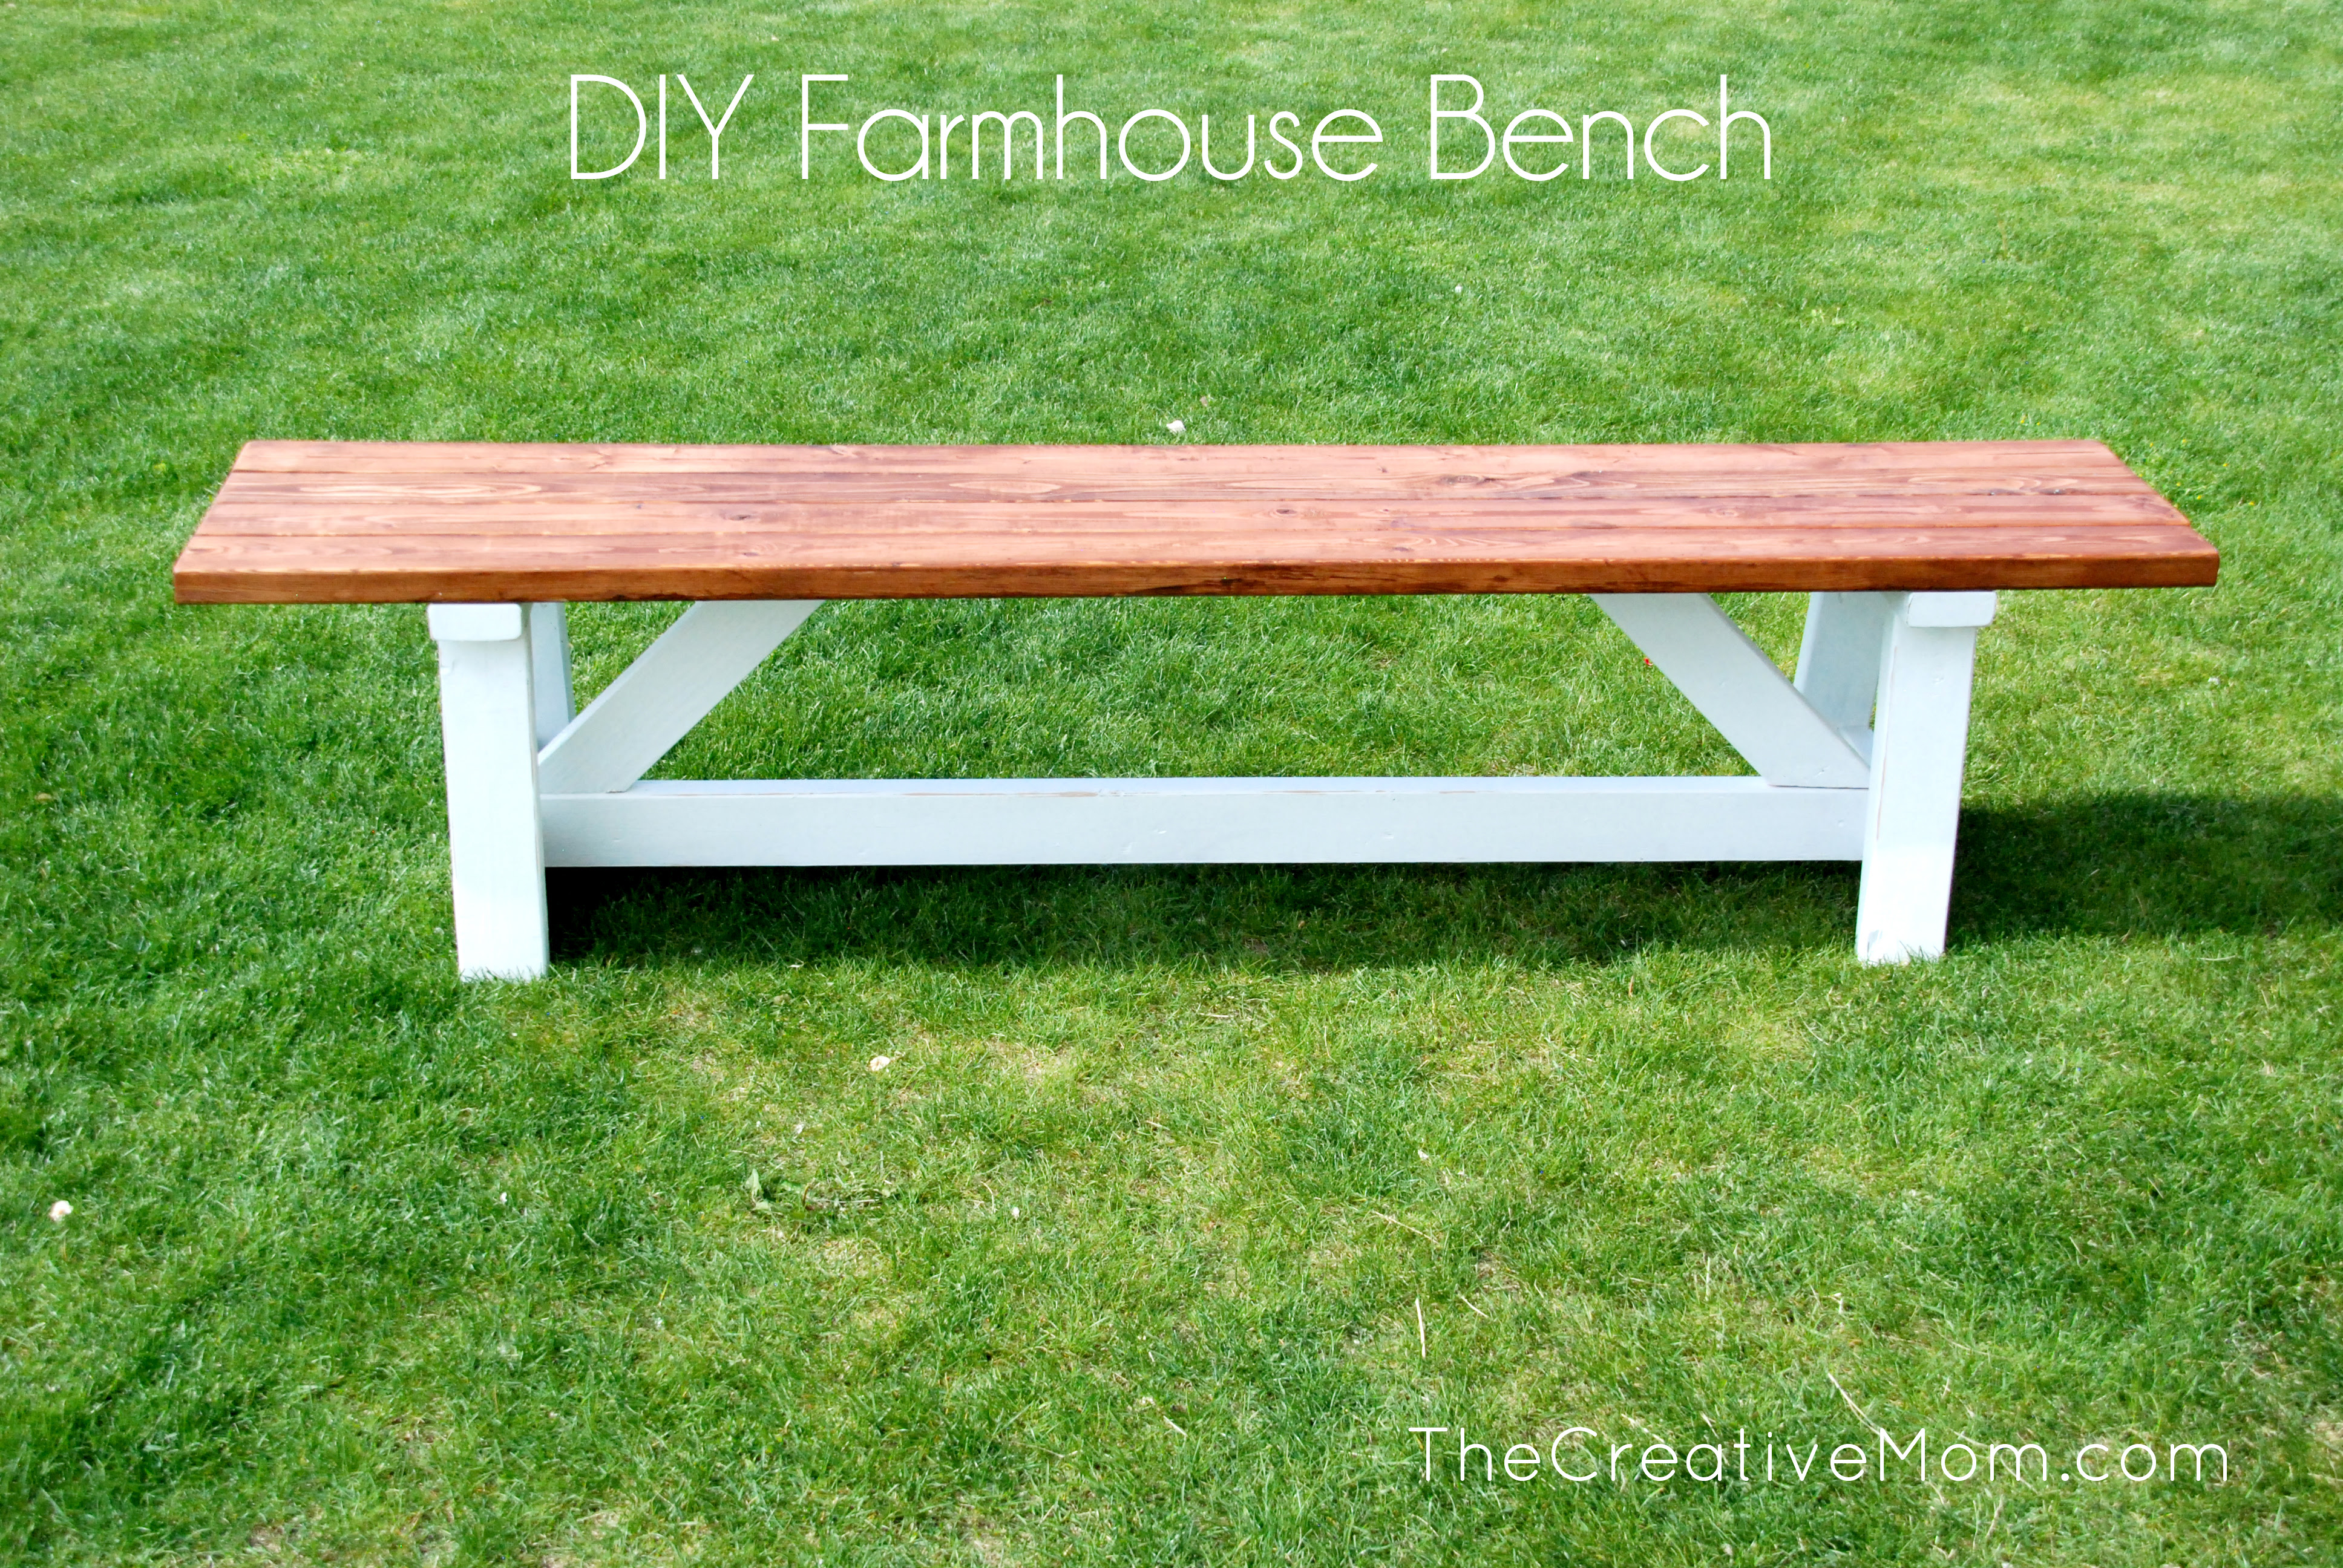 How to build a bench - The Creative Mom